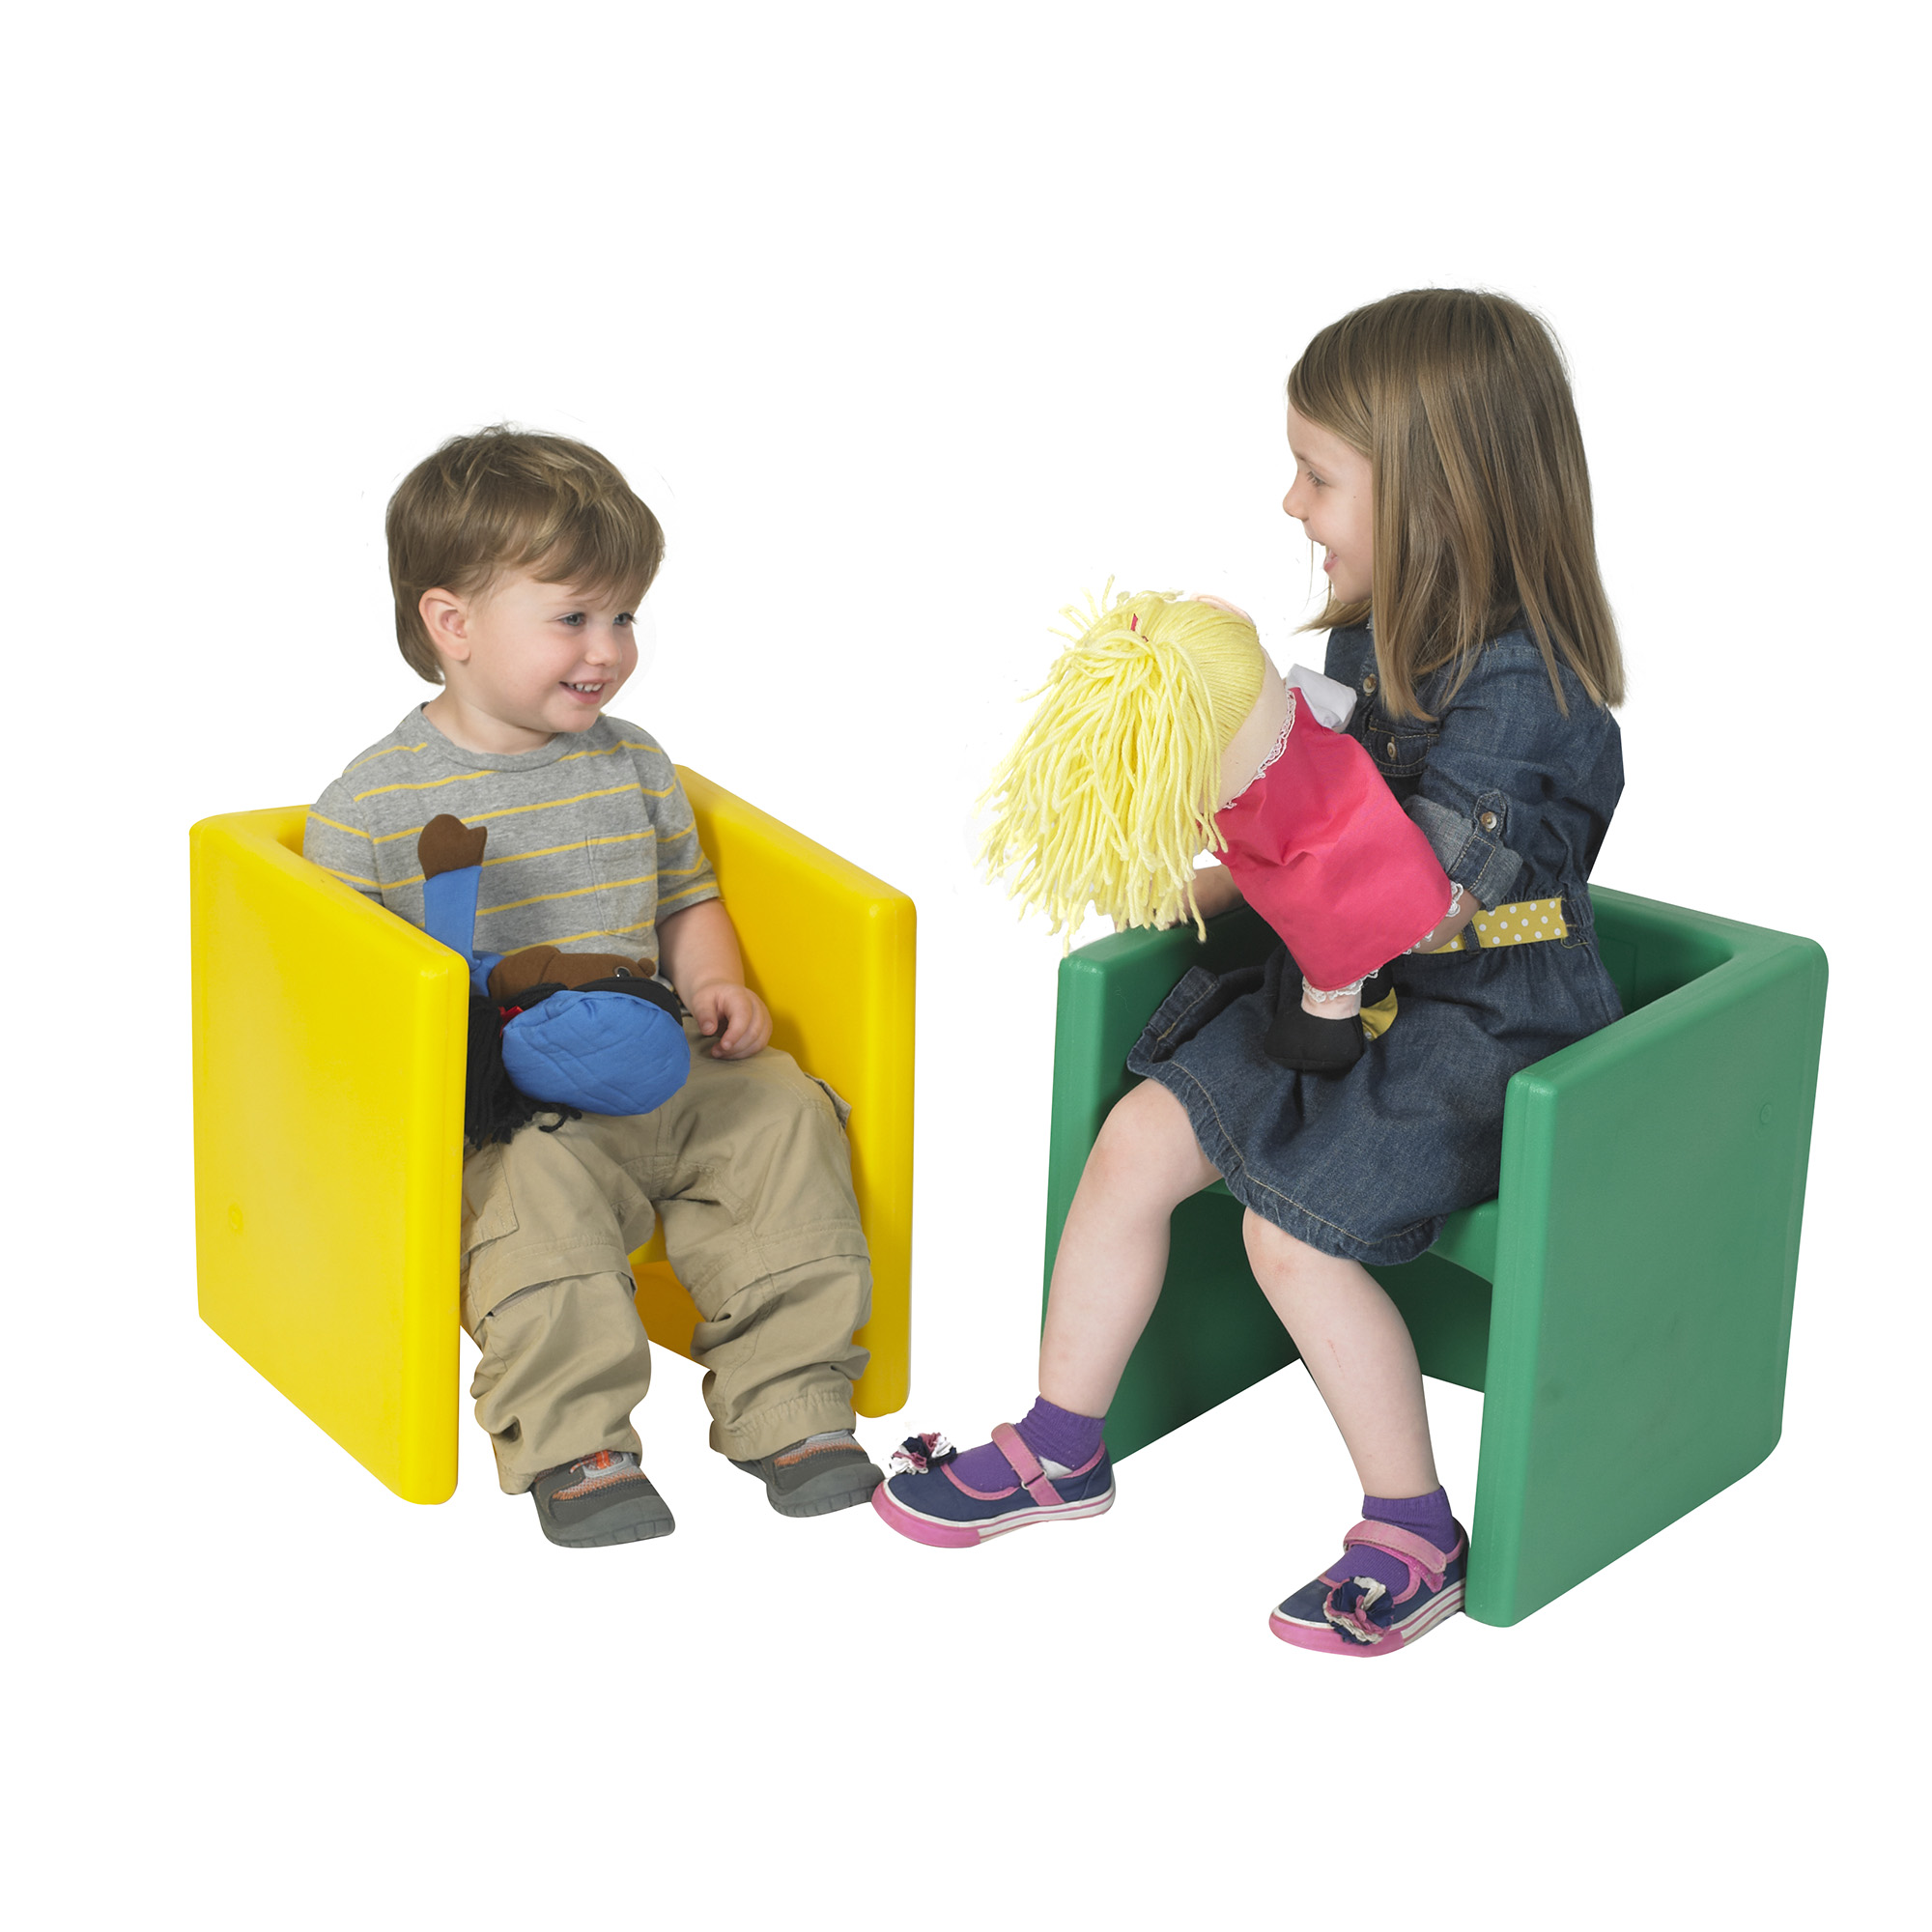 Cube Chair - Set of 2 Yellow and Green